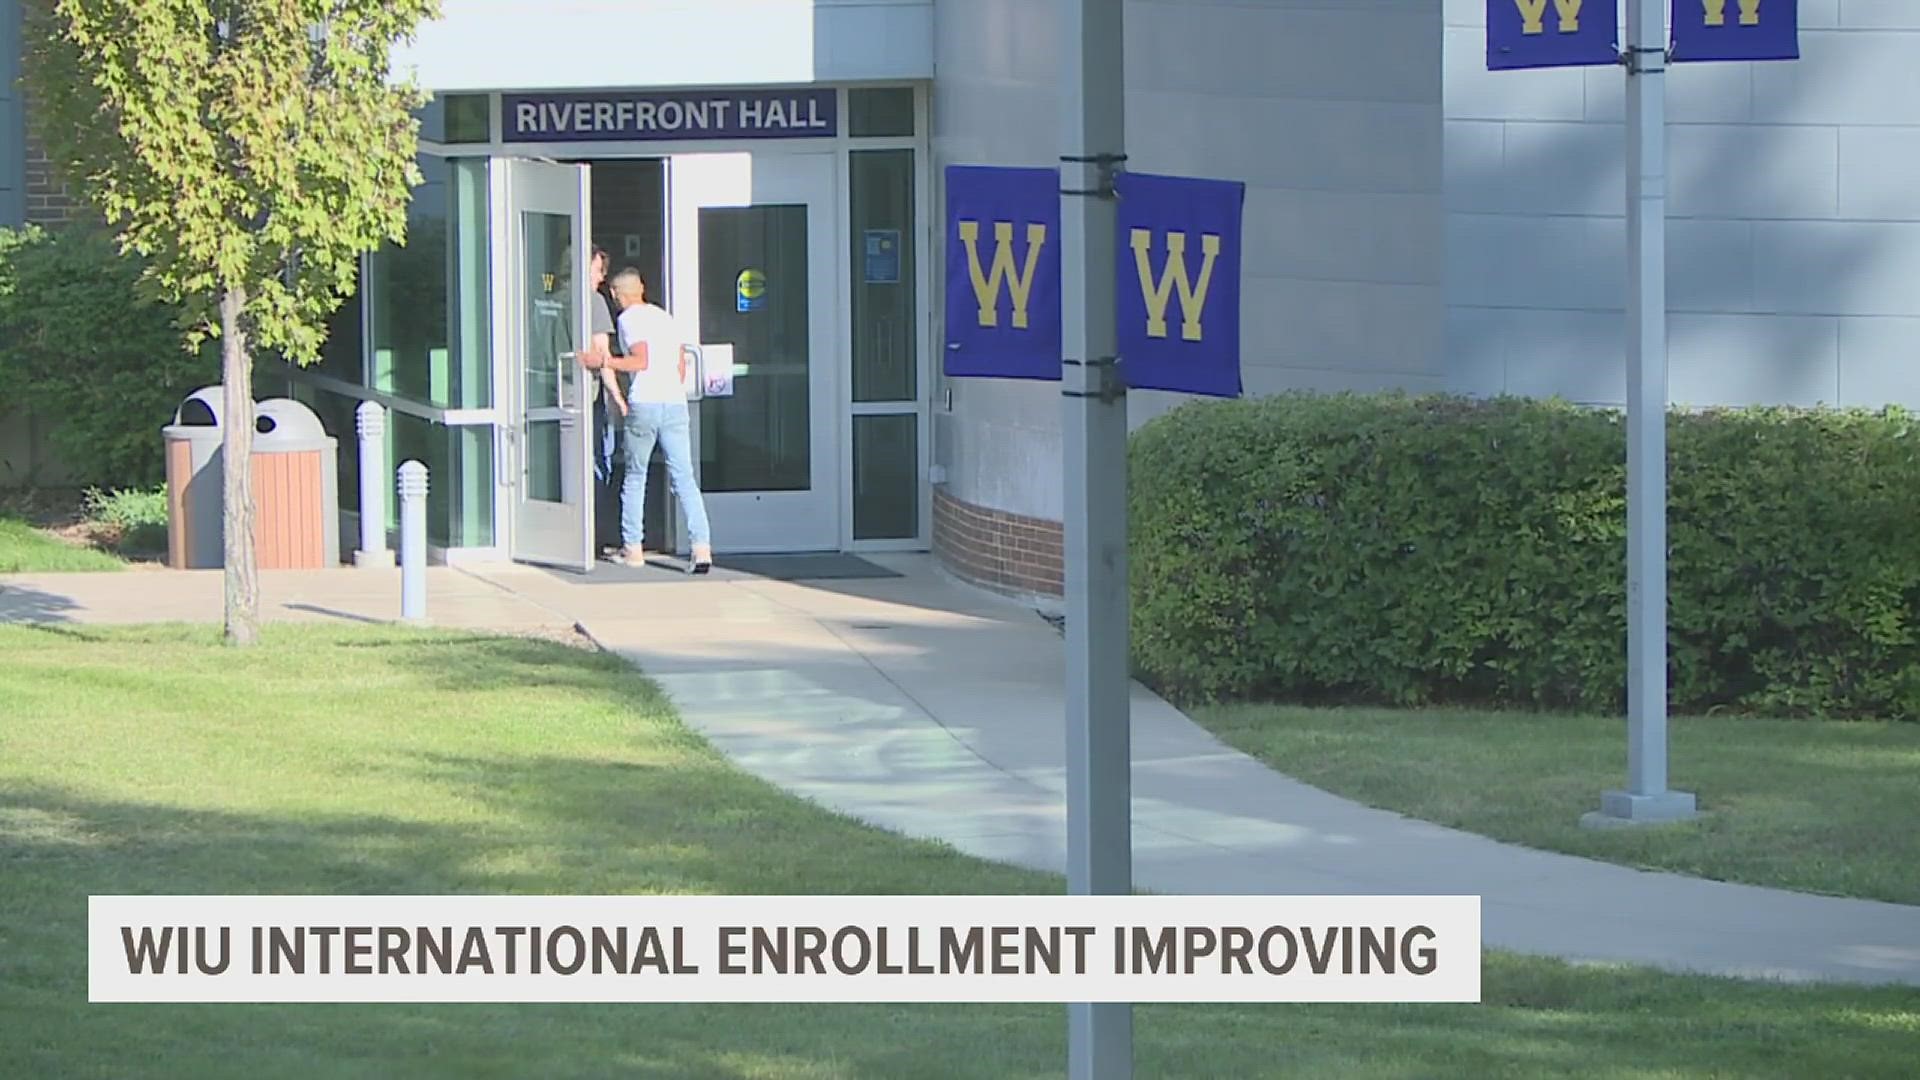 Western Illinois University-Quad Cities is continuing to grow its international enrollment thanks to some unique partnerships. News 8's Jonathon Fong reports.